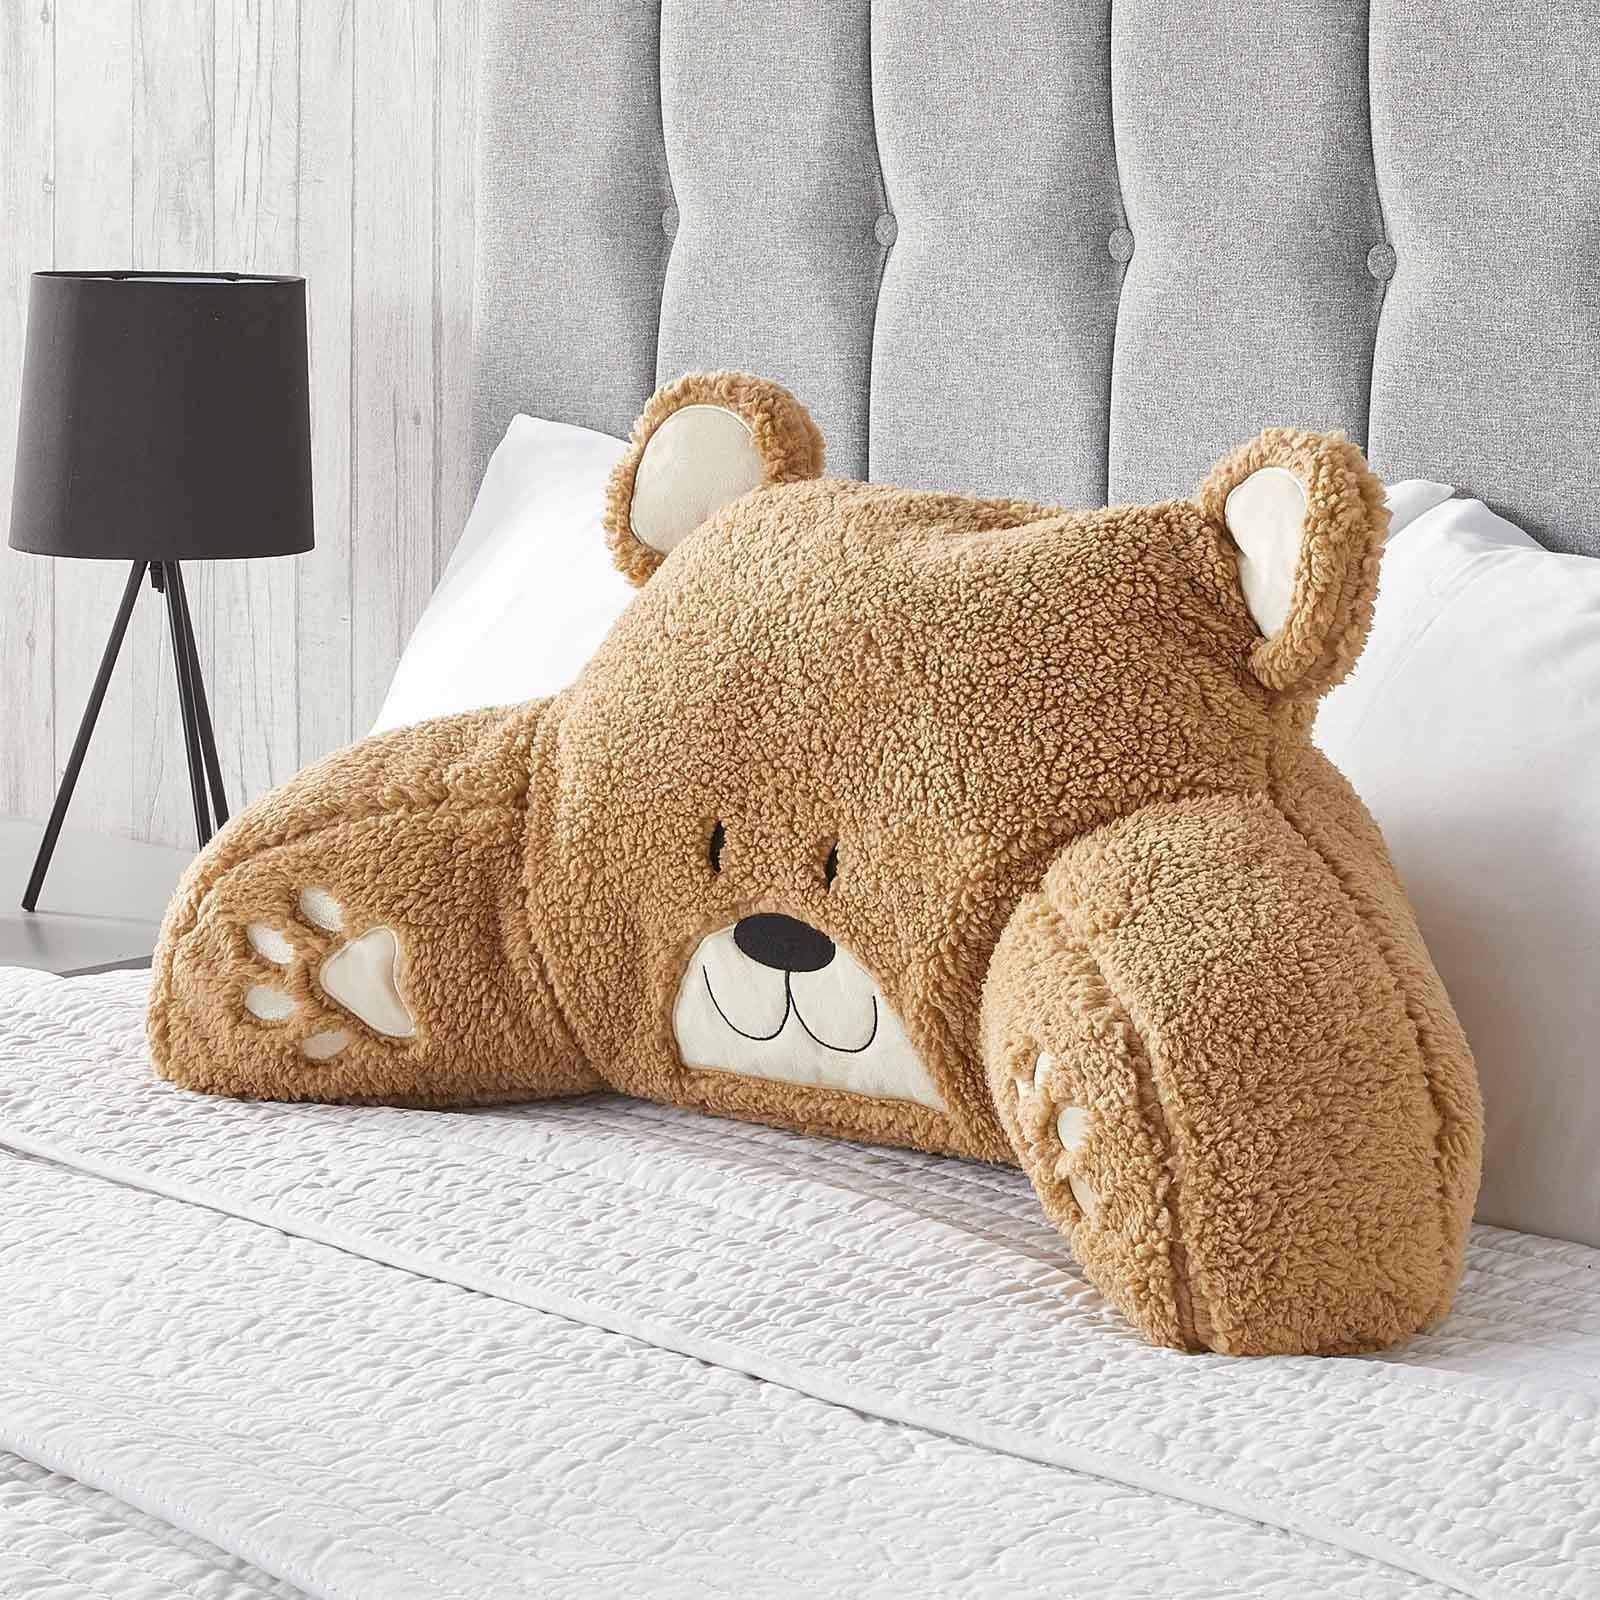 Teddy Fleece Bear Cushion with Arms Lumbar Chair Support Back Rest Pillow Kids - image 1